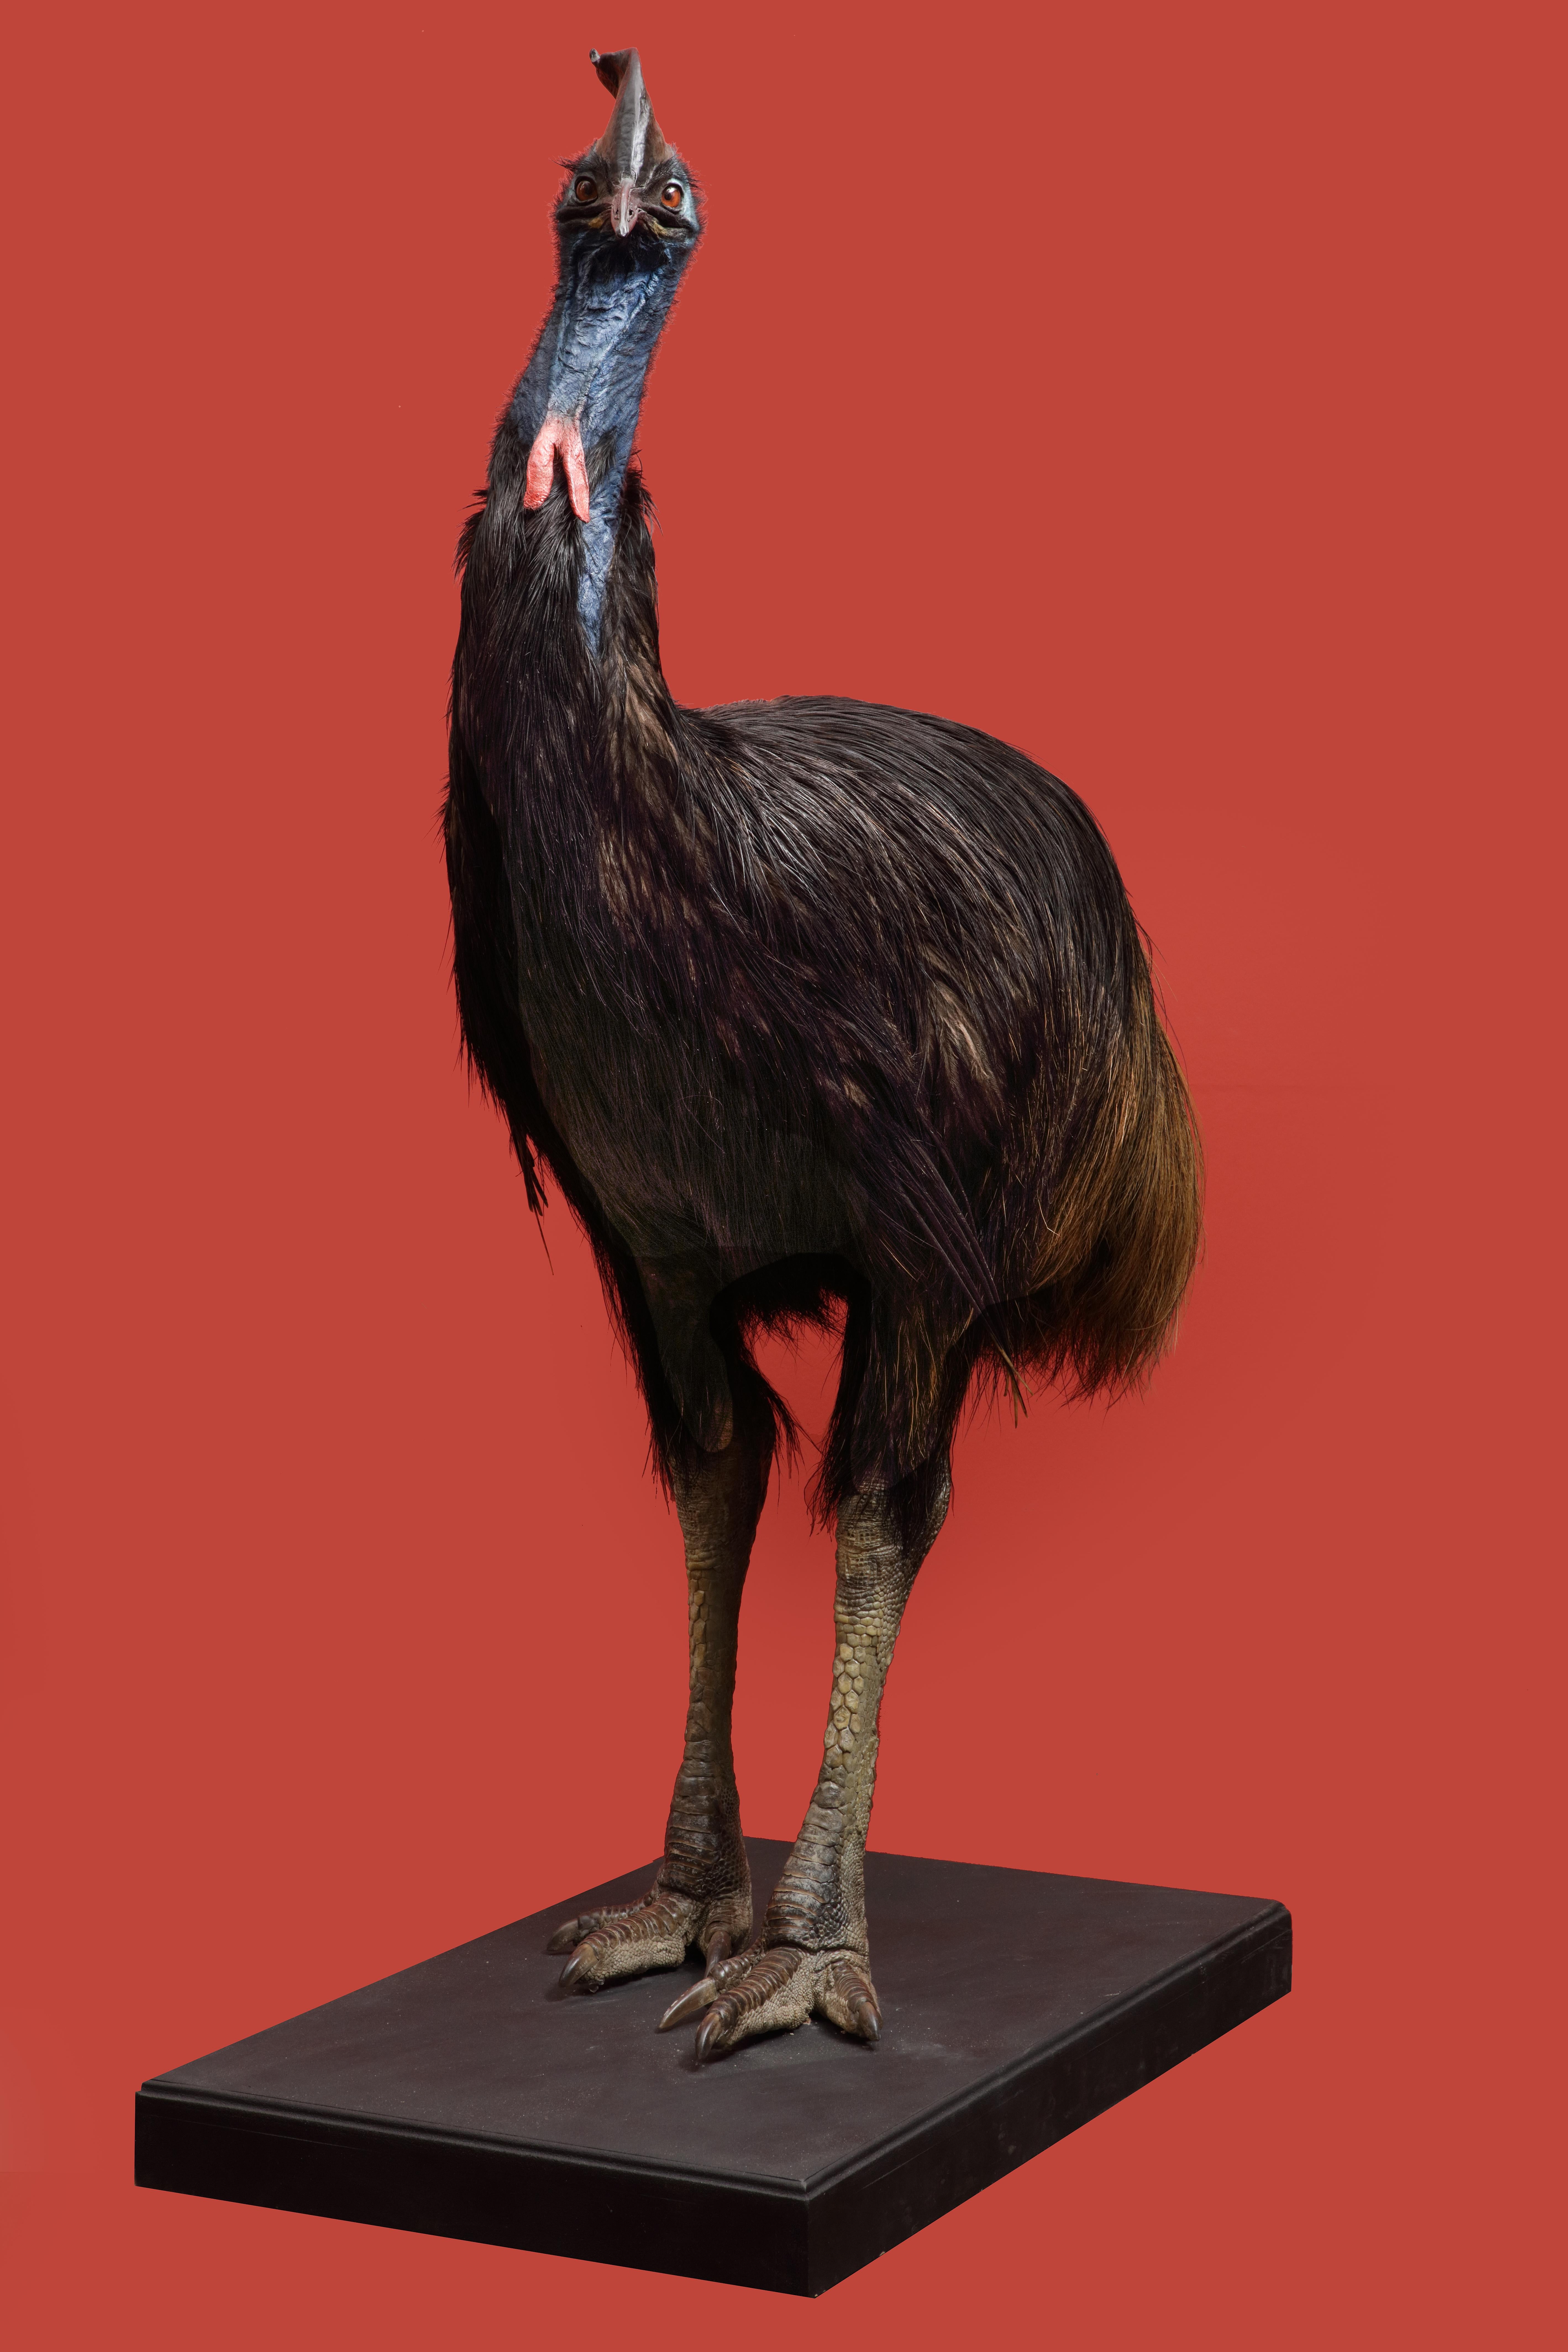 The Netherlands, 21st century, died of natural cause in a European zoo

H. 141 cm

Endemic to North-east Australia and Papua-Guinea, the Cassowary is regarded as the most dangerous bird in the world. In extremely urbanised areas where Cassowaries